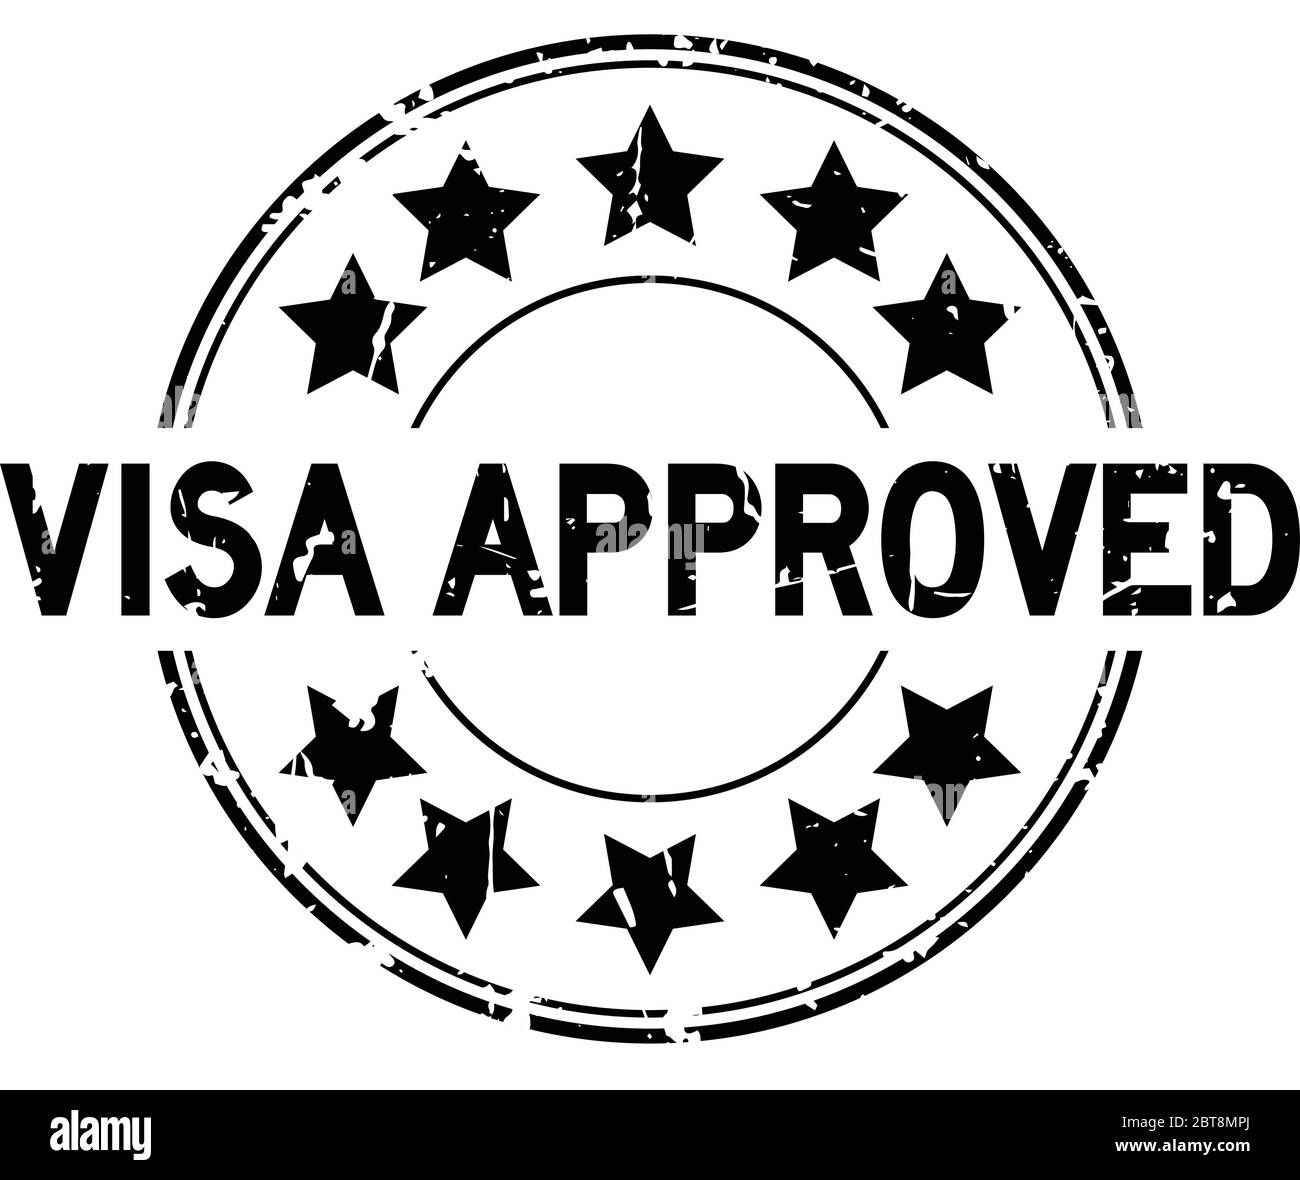 Grunge black visa approved with star icon round rubber seal stamp on white background Stock Vector